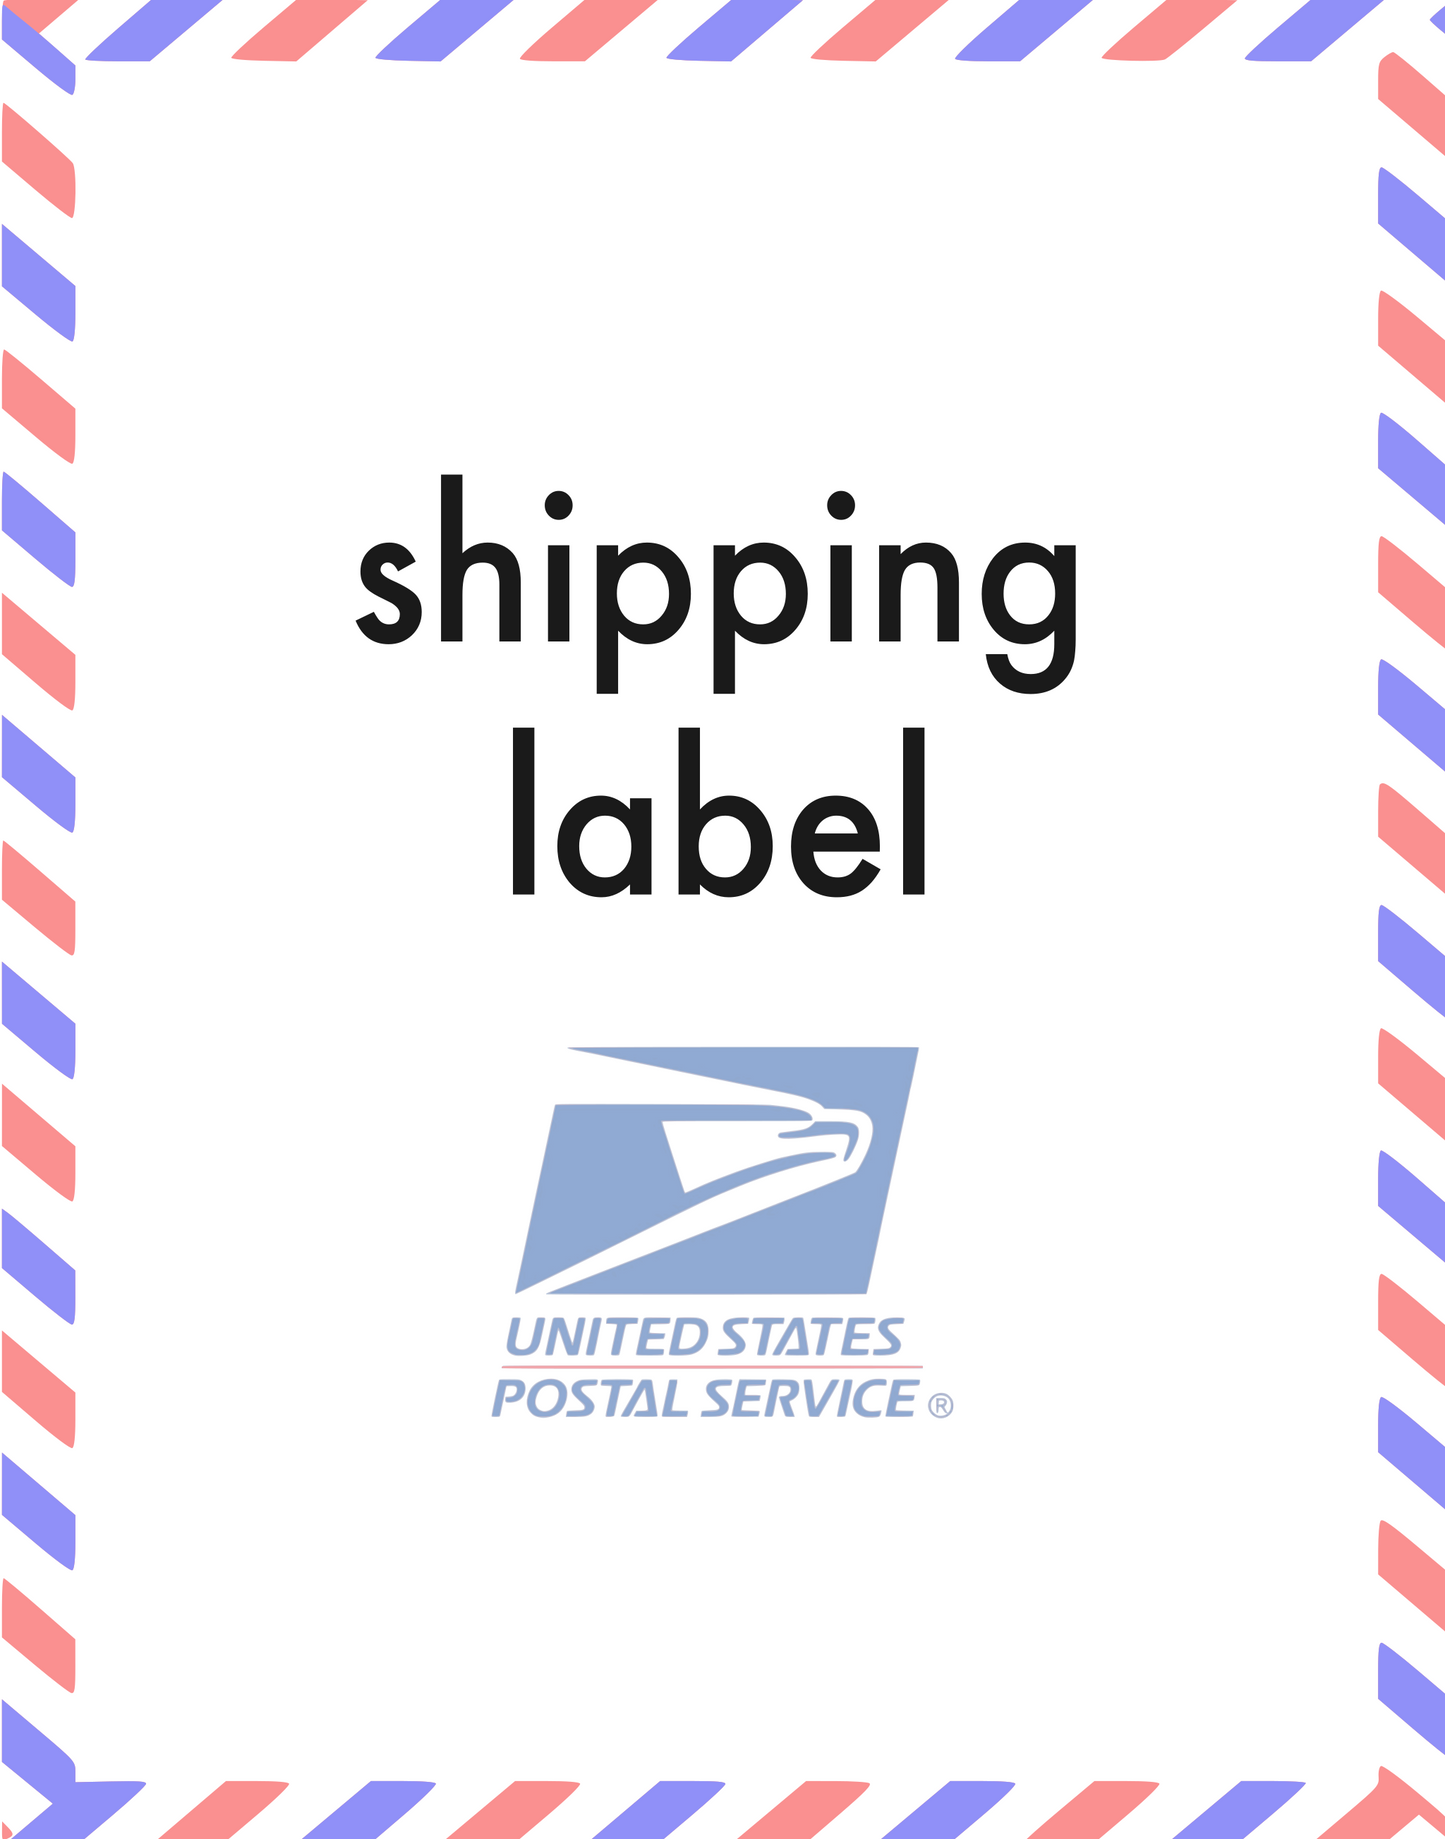 Shipping Label for new item, 15 oz.